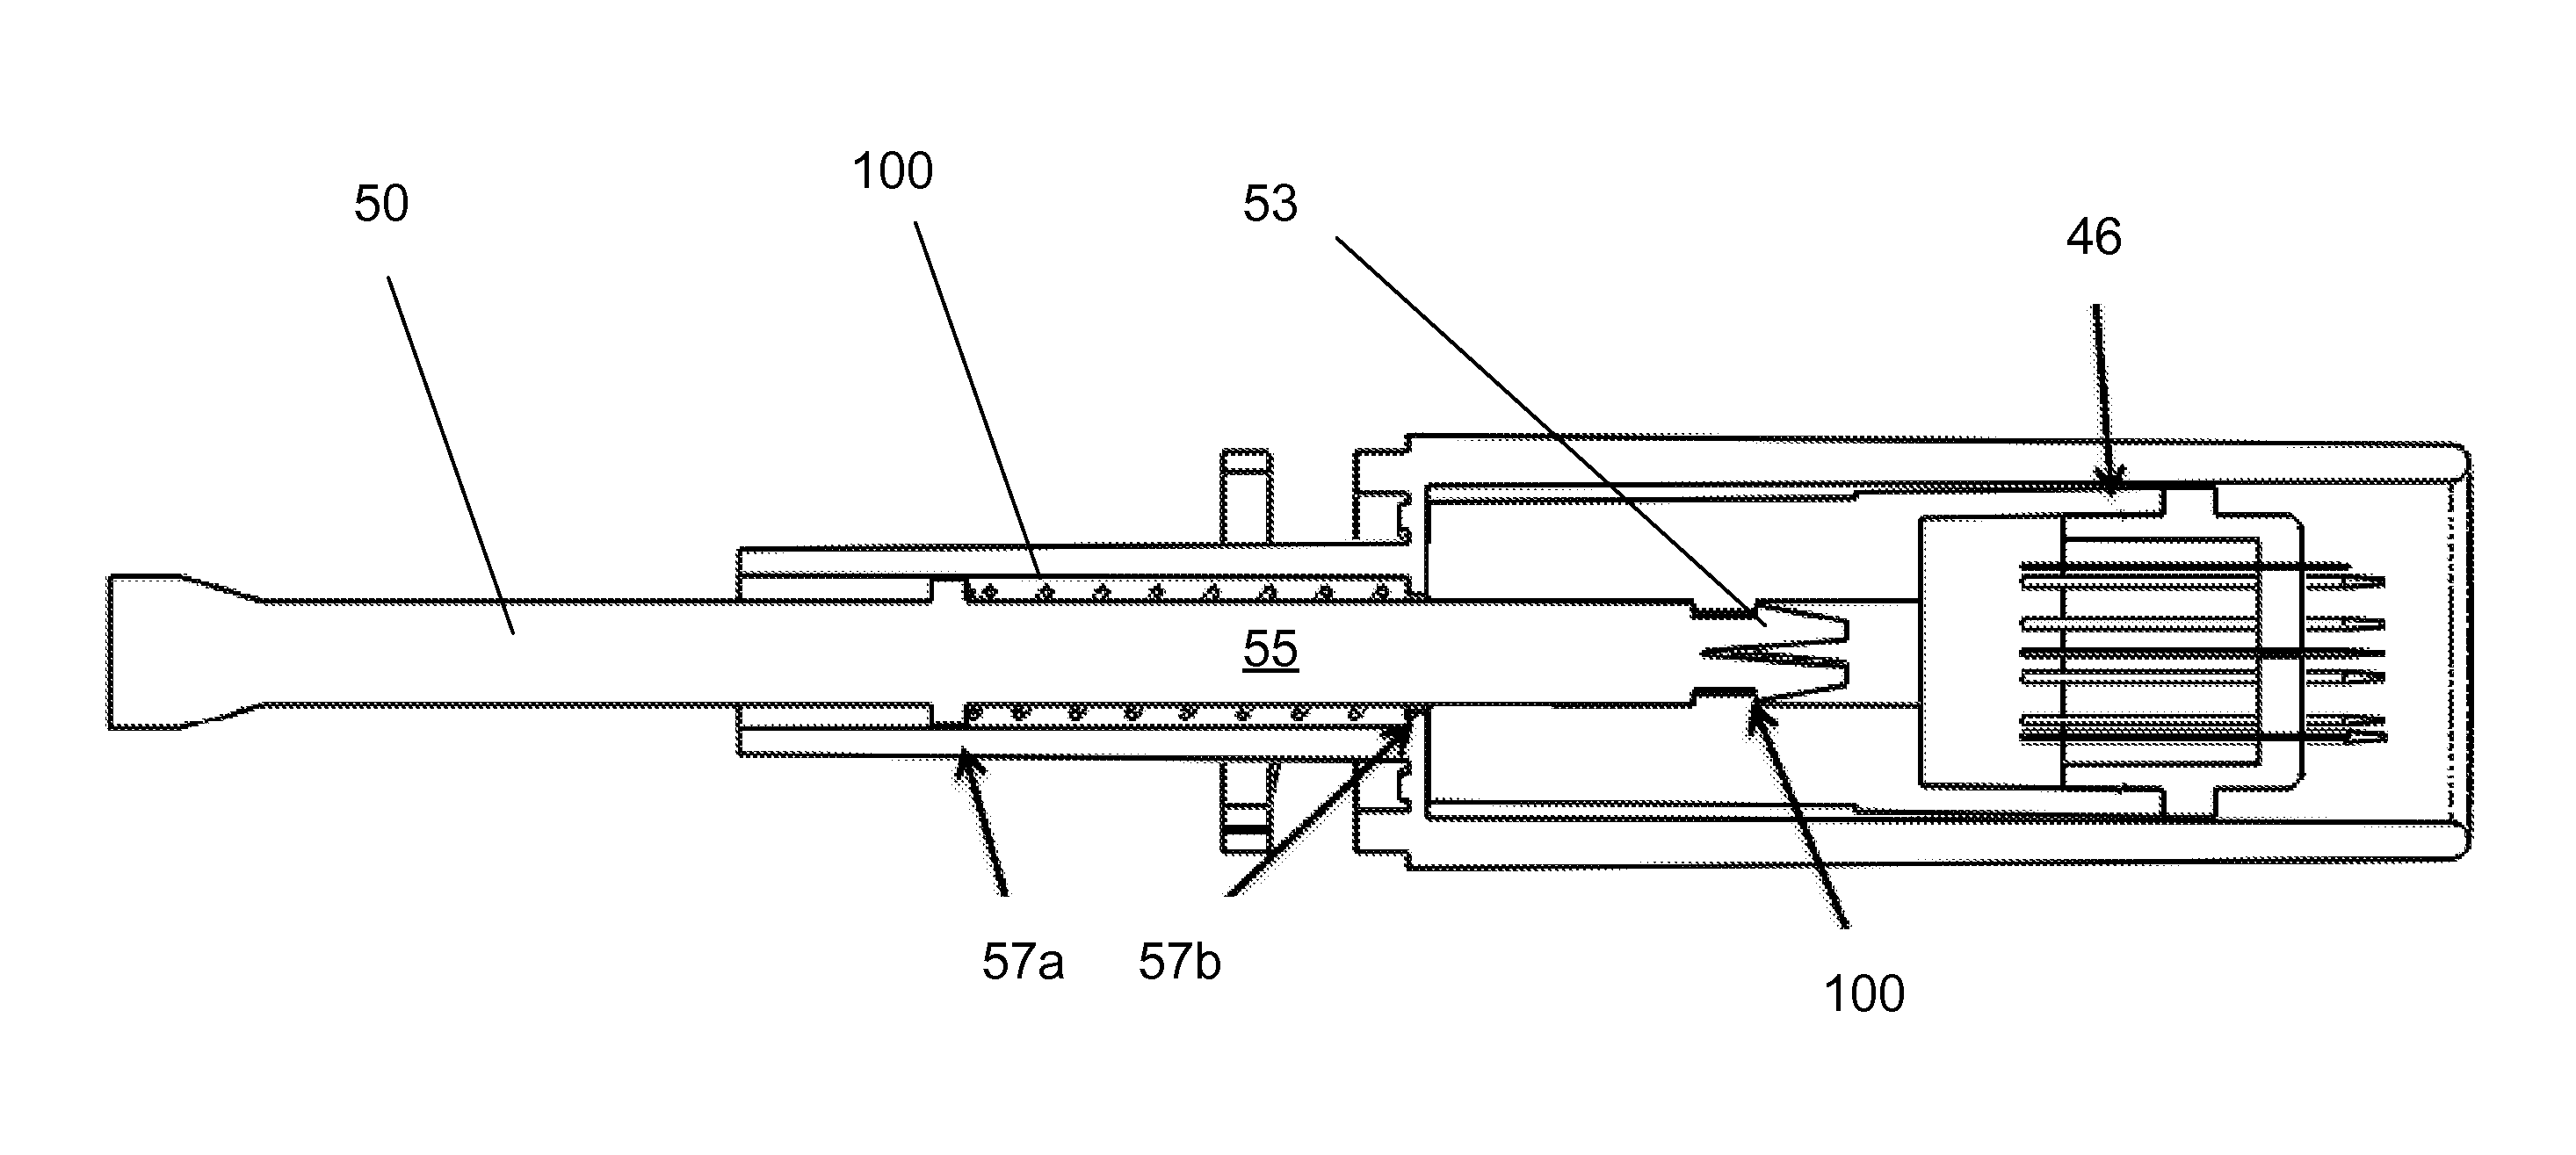 Skin puncturing device